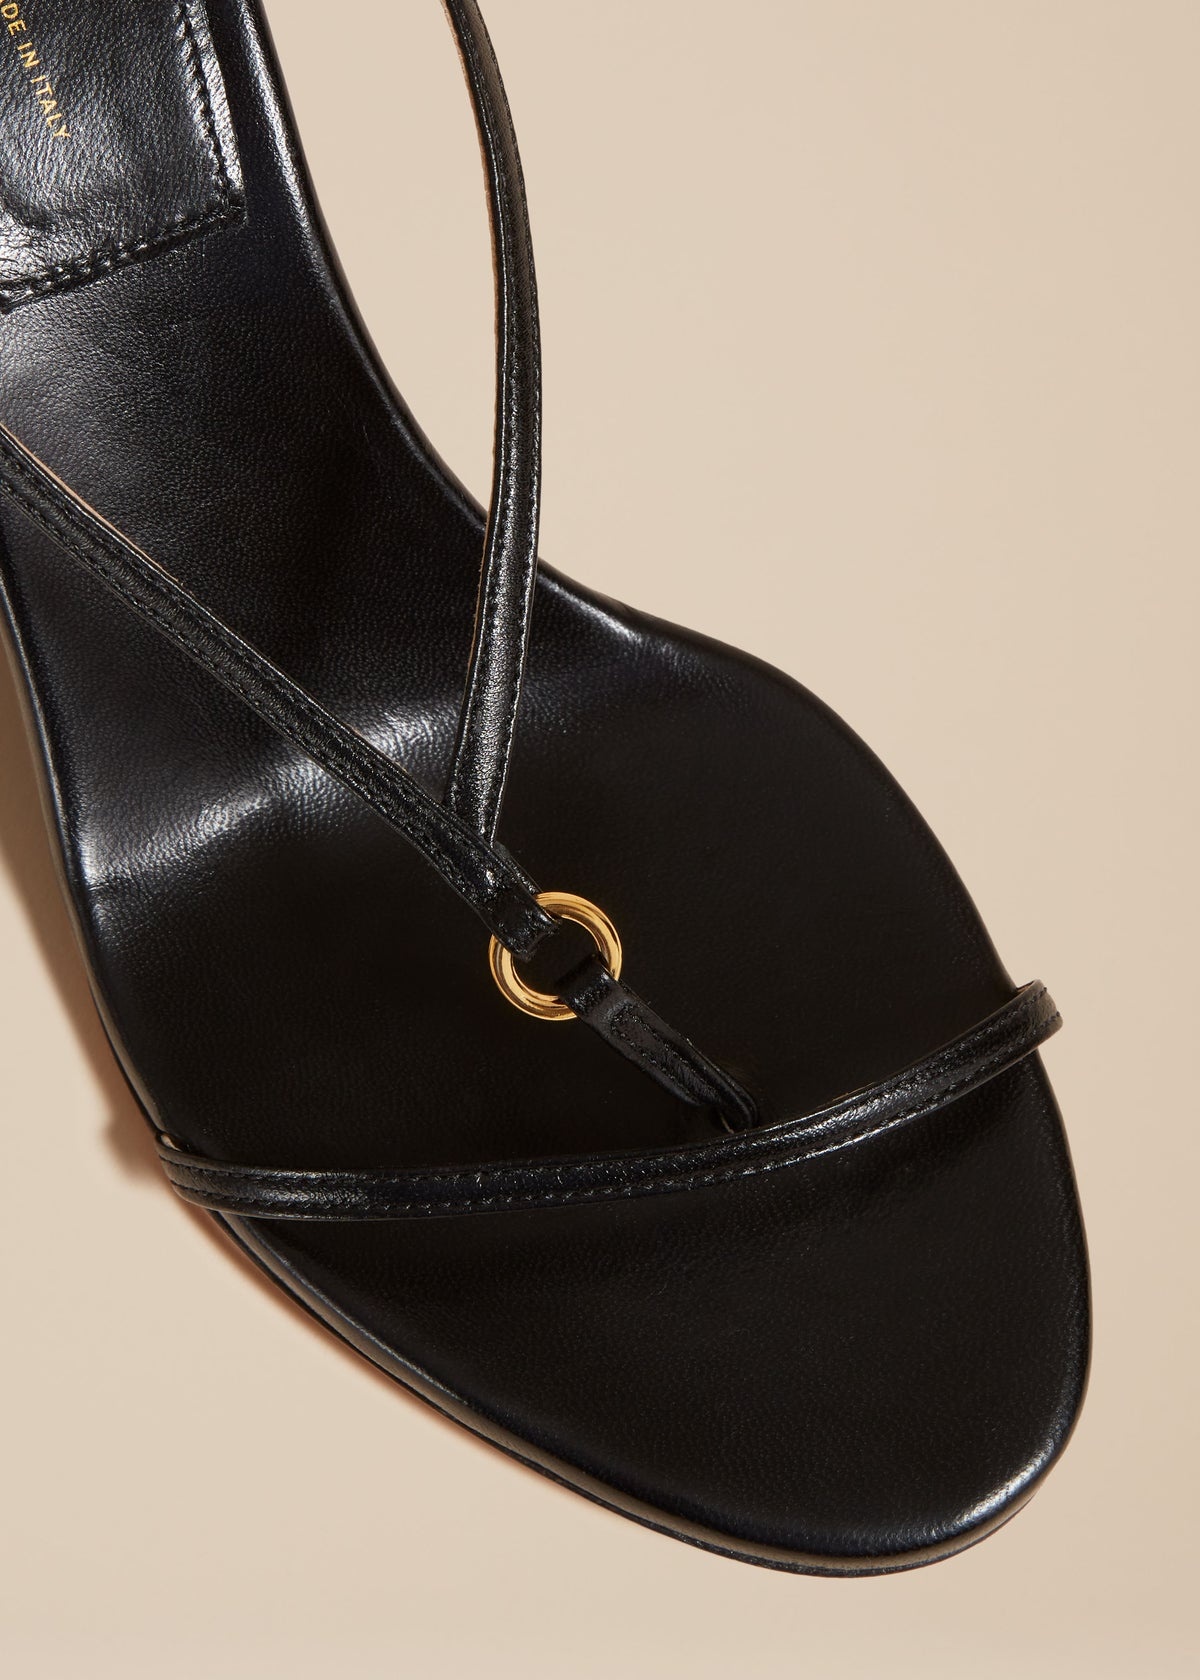 The Marion Strappy Wedge Sandal in Black Leather - 3